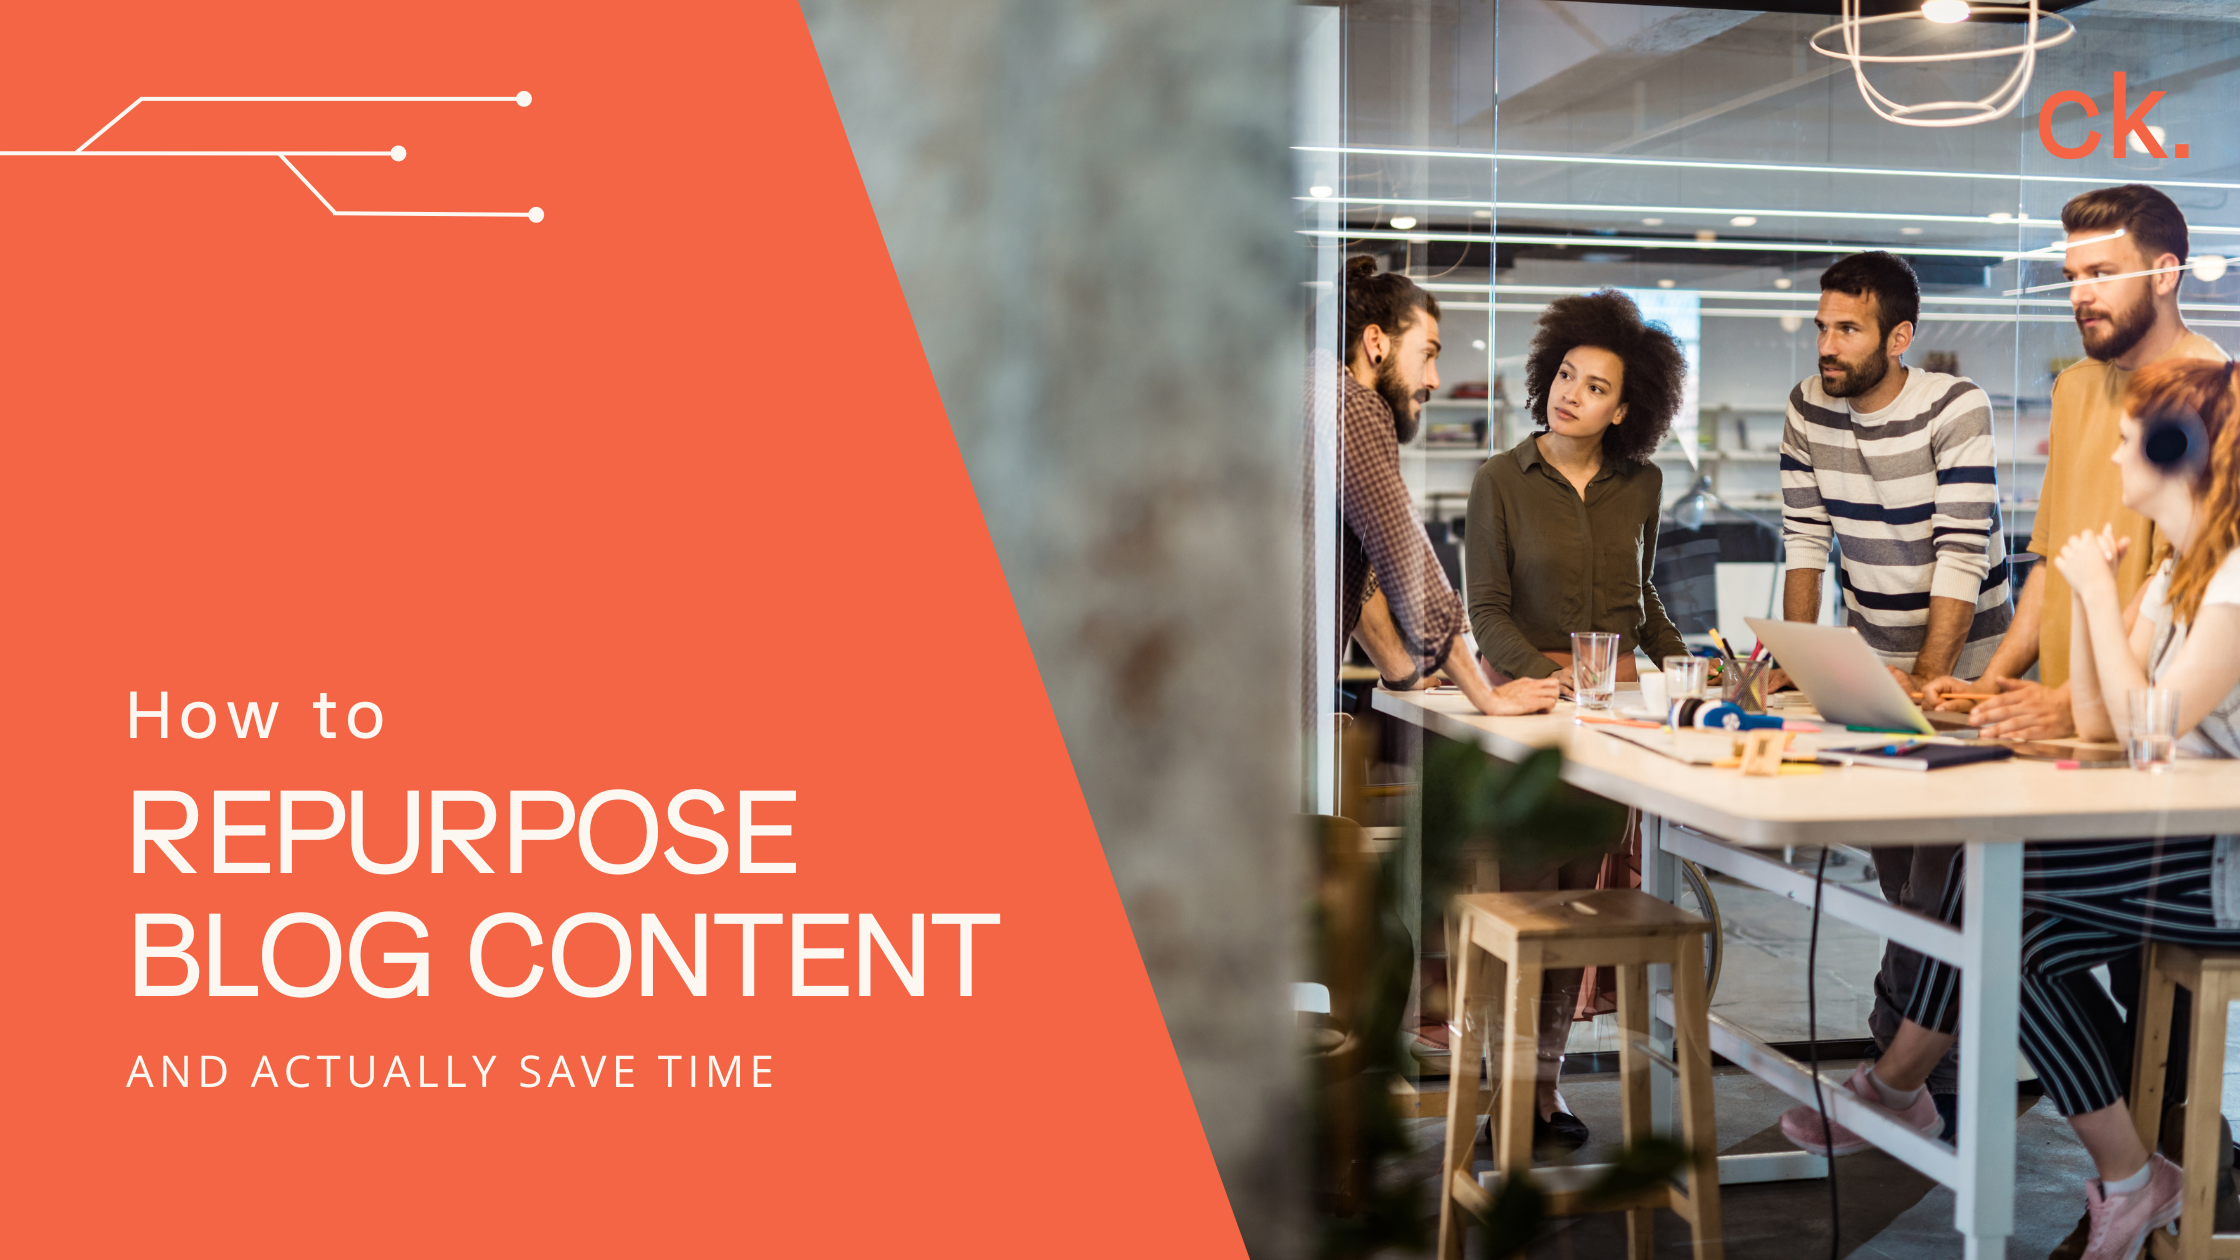 How to Repurpose Blog Content and (Actually) Save Time